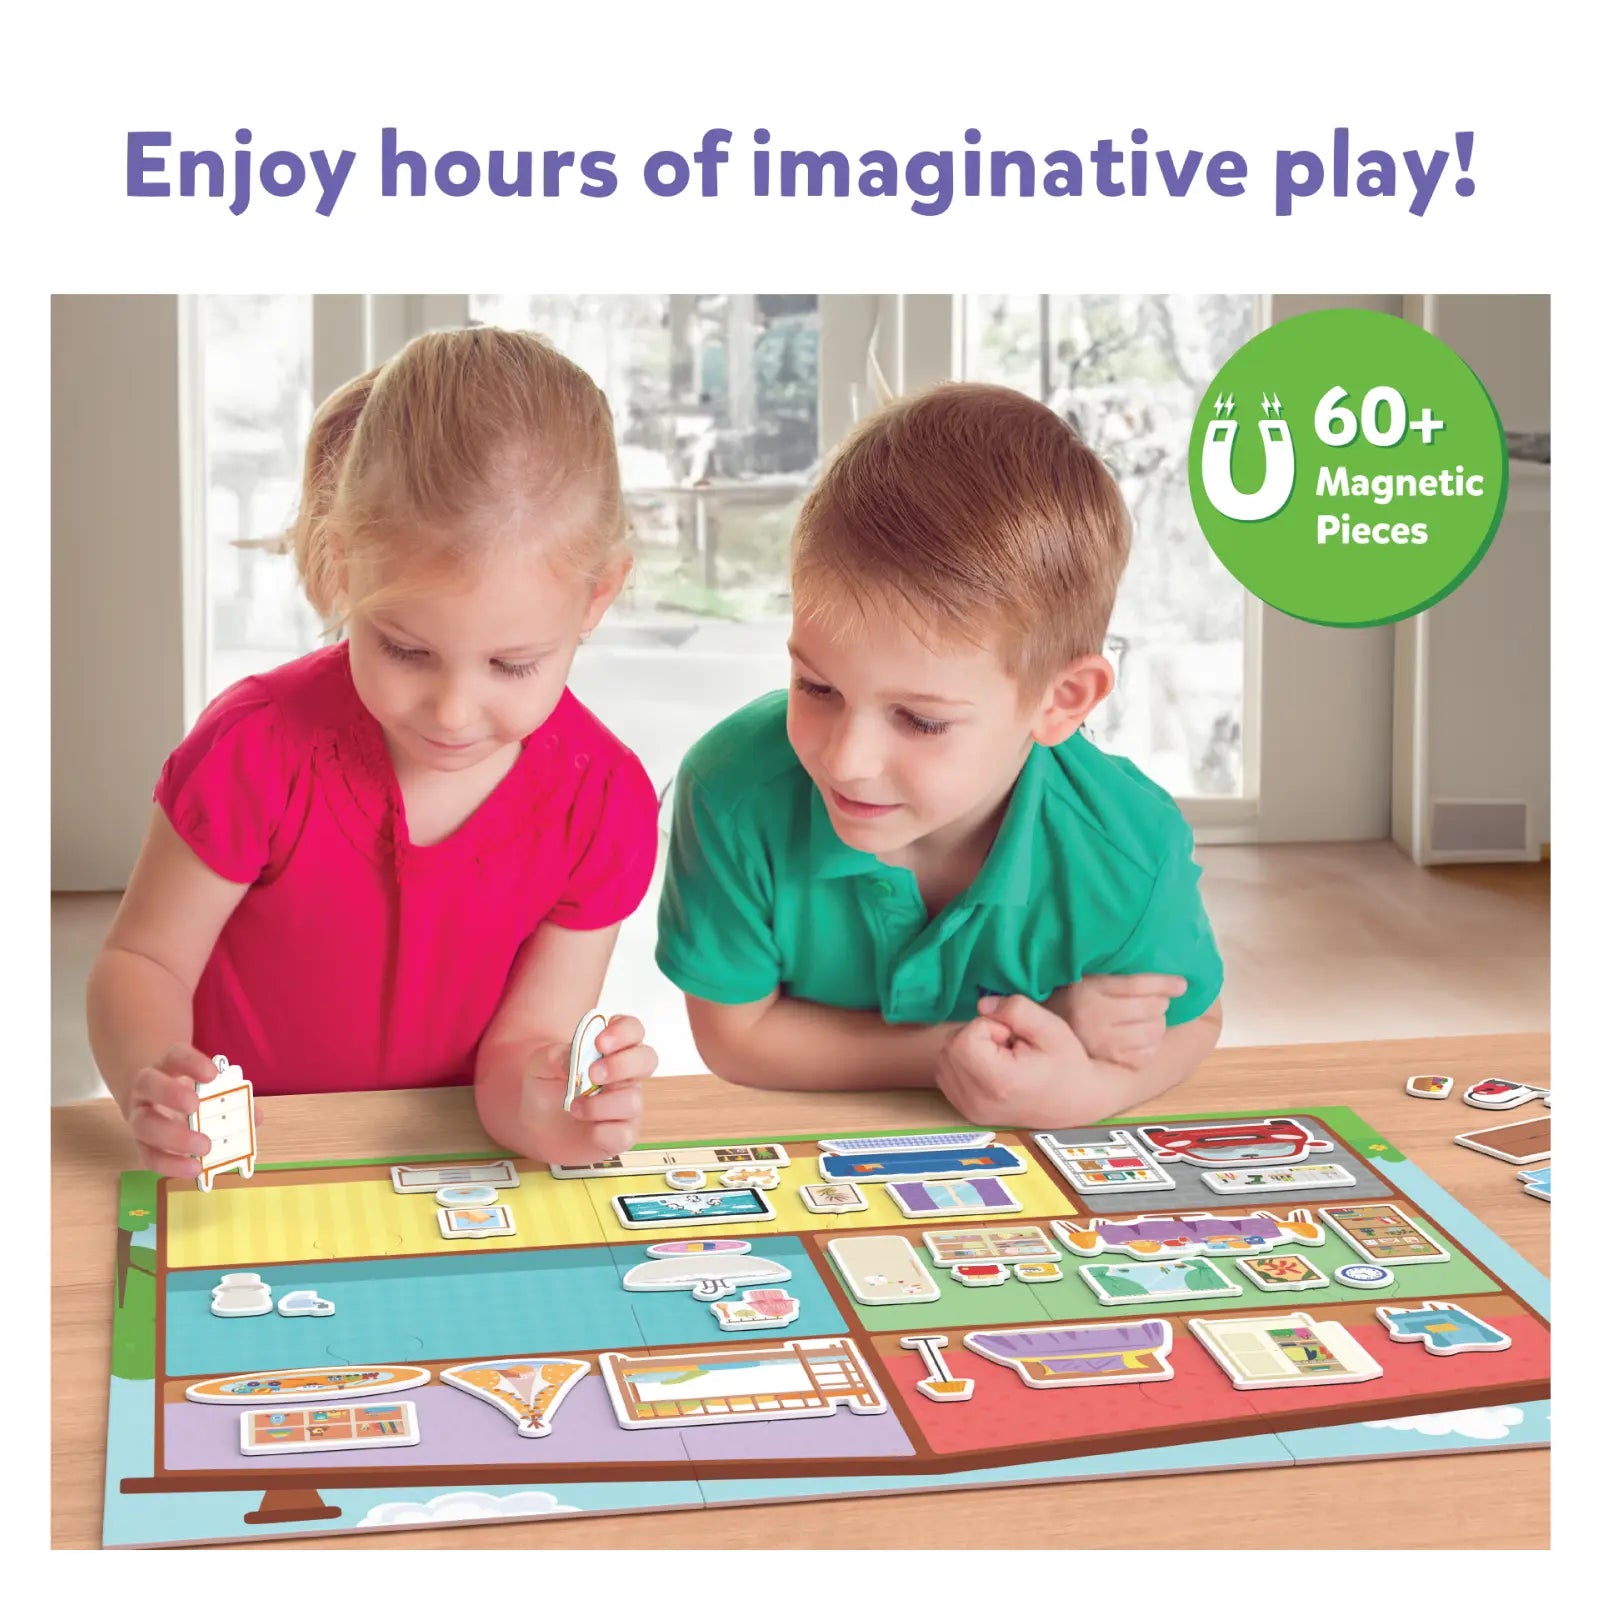 Magnetopia - Design Your Own Home | Interactive Pretend Play Set (ages 3-7)